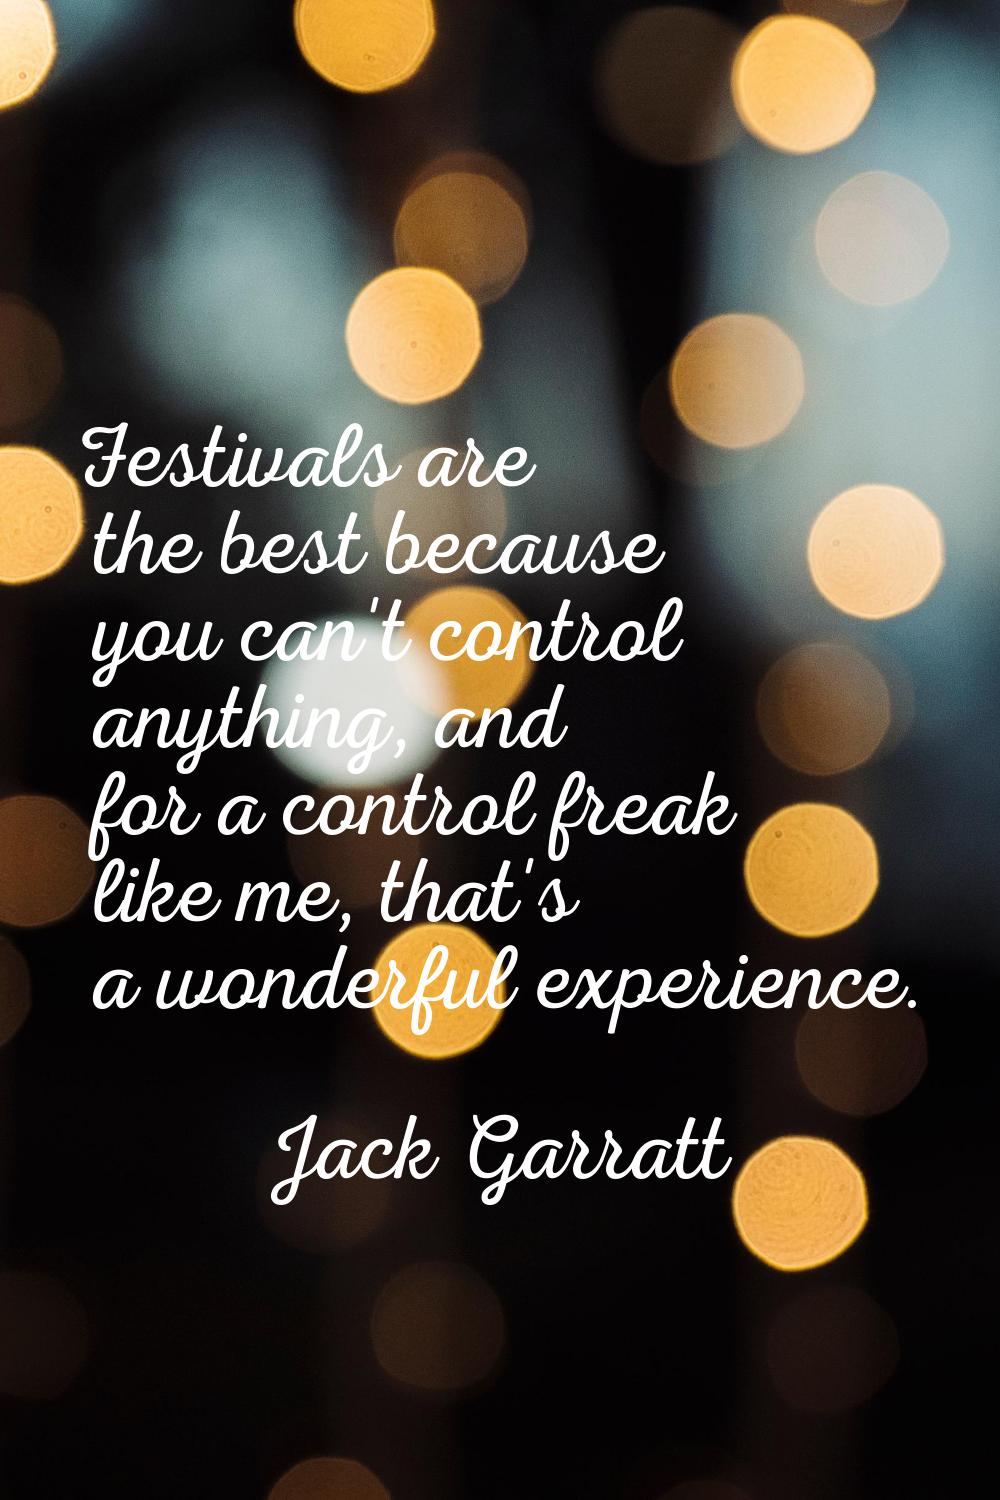 Festivals are the best because you can't control anything, and for a control freak like me, that's 